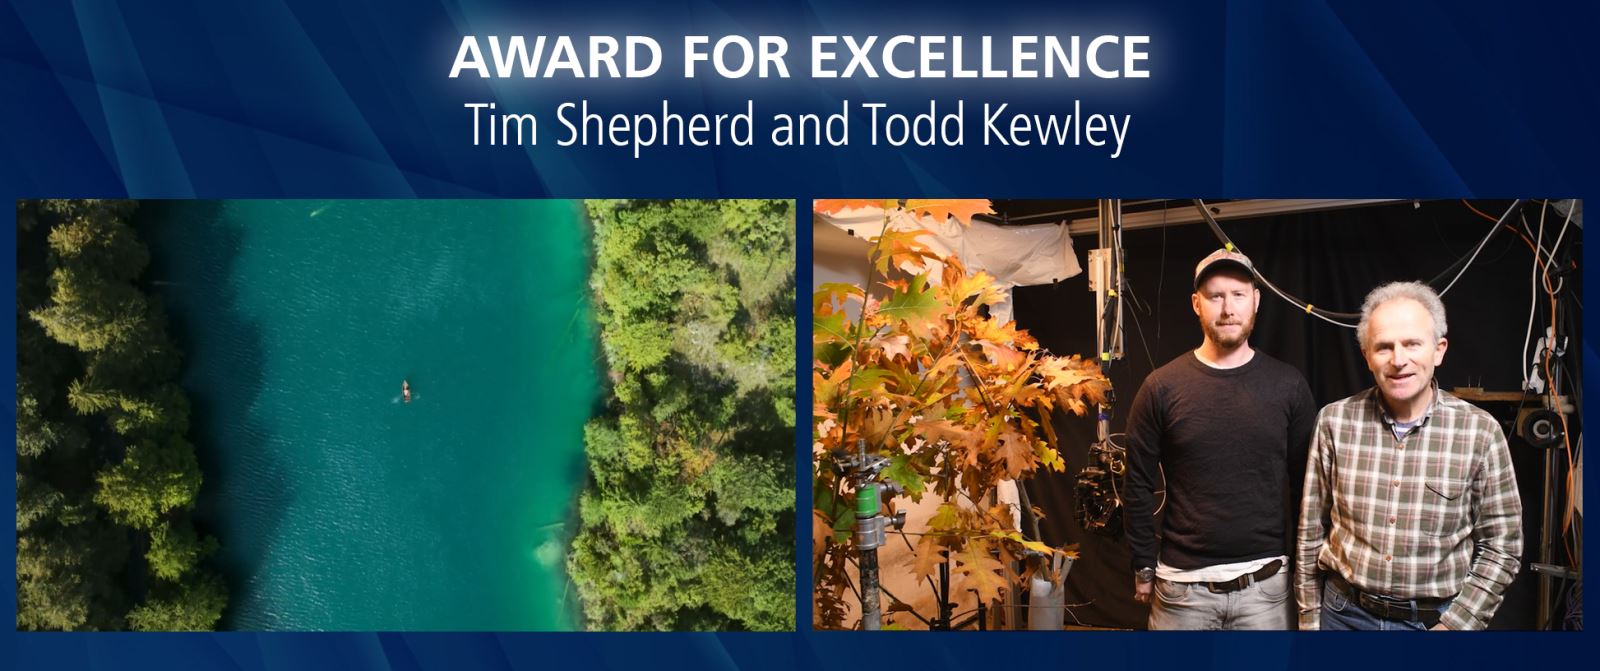 Award for Excellence - Tim Shepherd and Todd Kewley